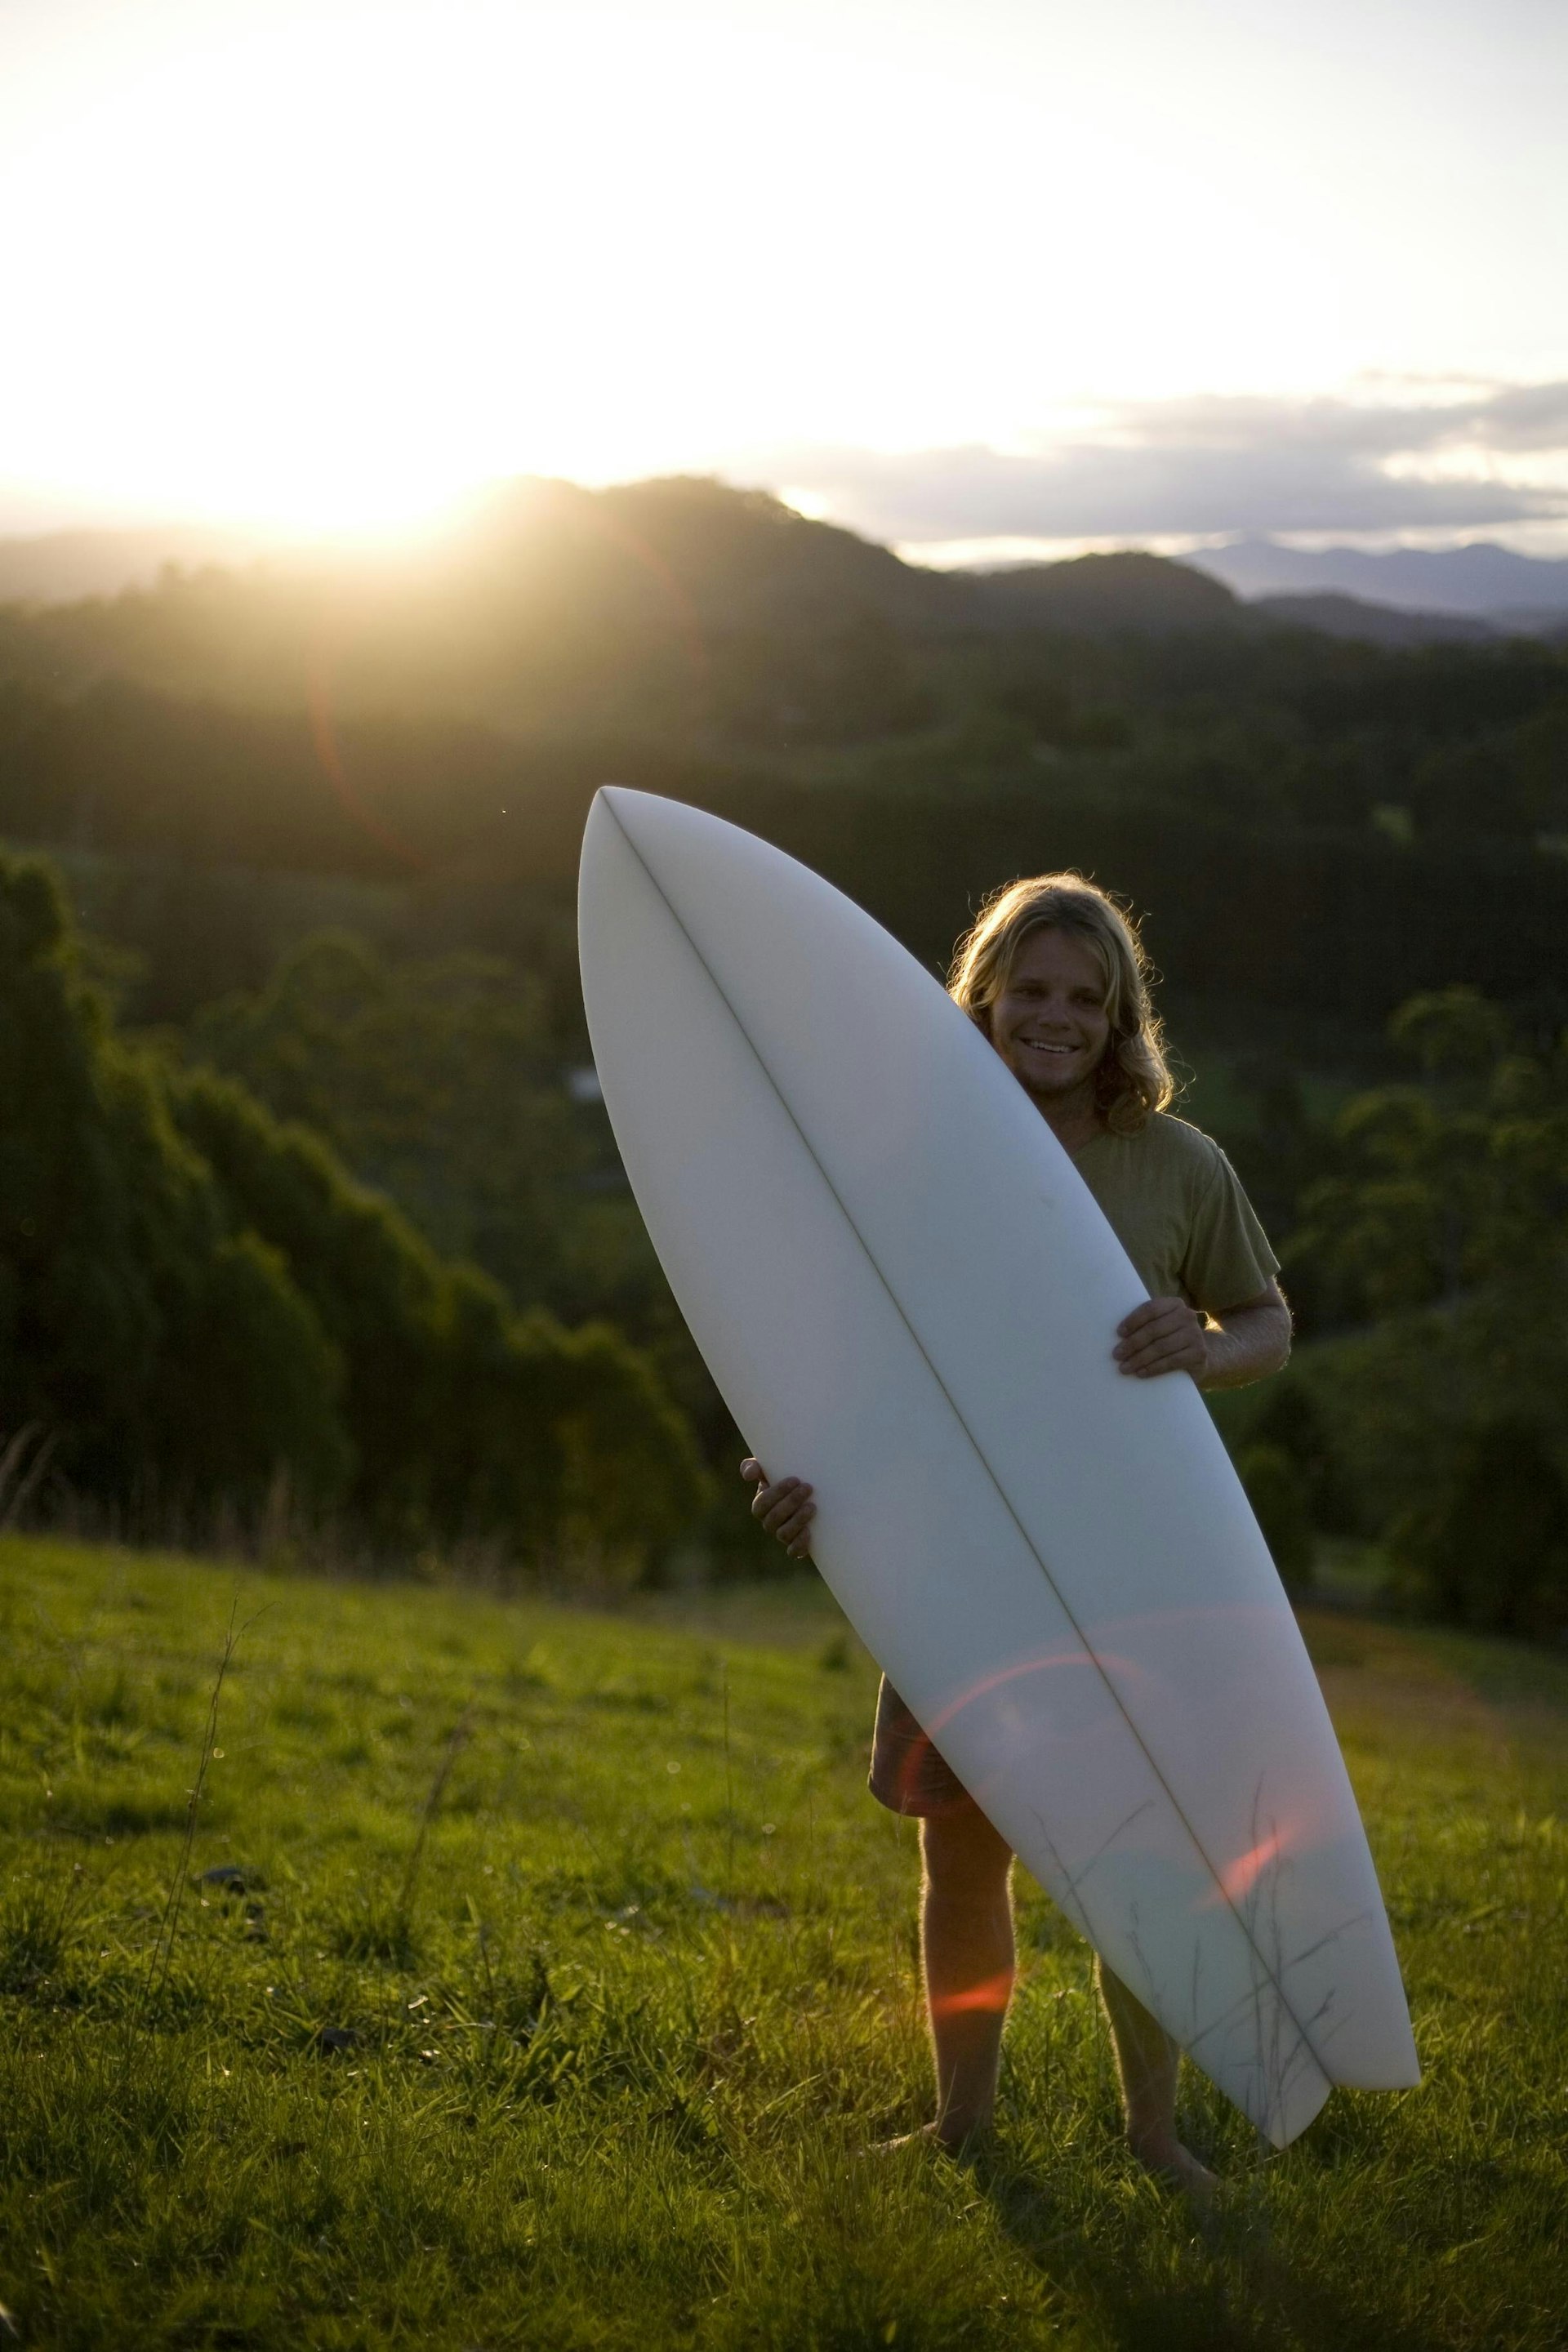 Surf films that inspire generations to imagine different worlds